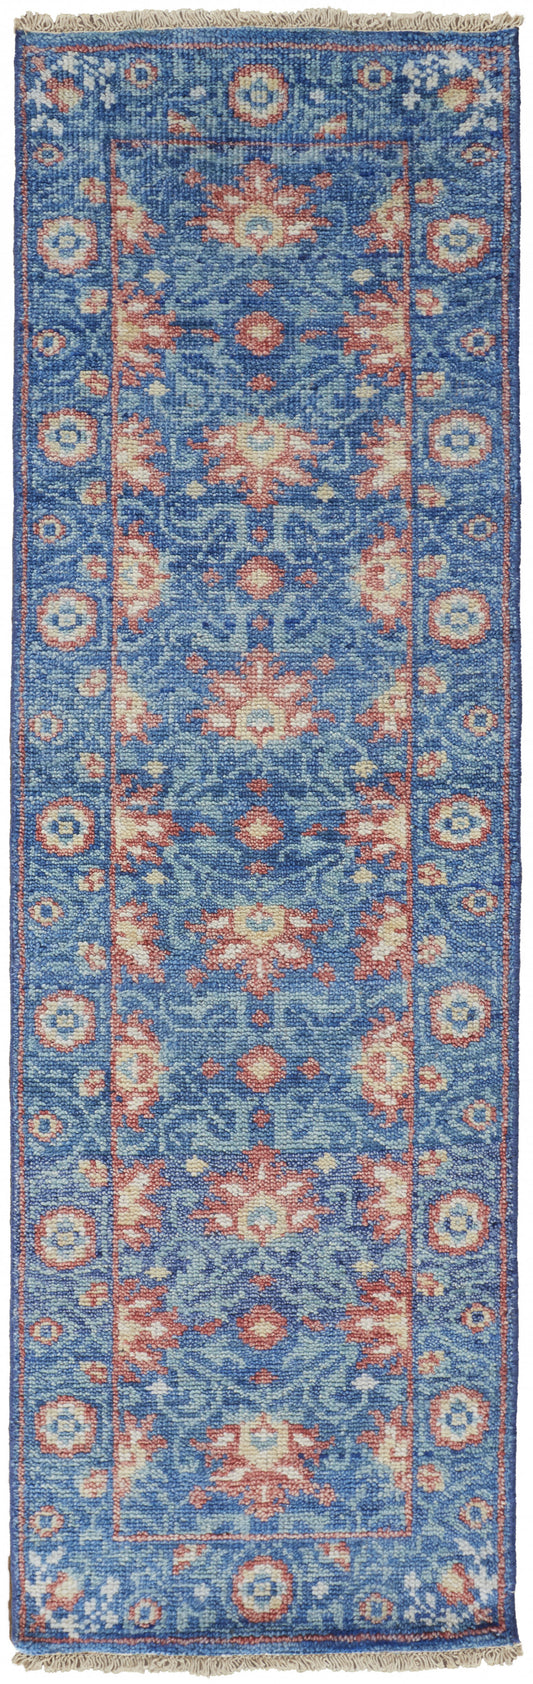 2' X 3' Blue And Red Wool Floral Hand Knotted Stain Resistant Area Rug